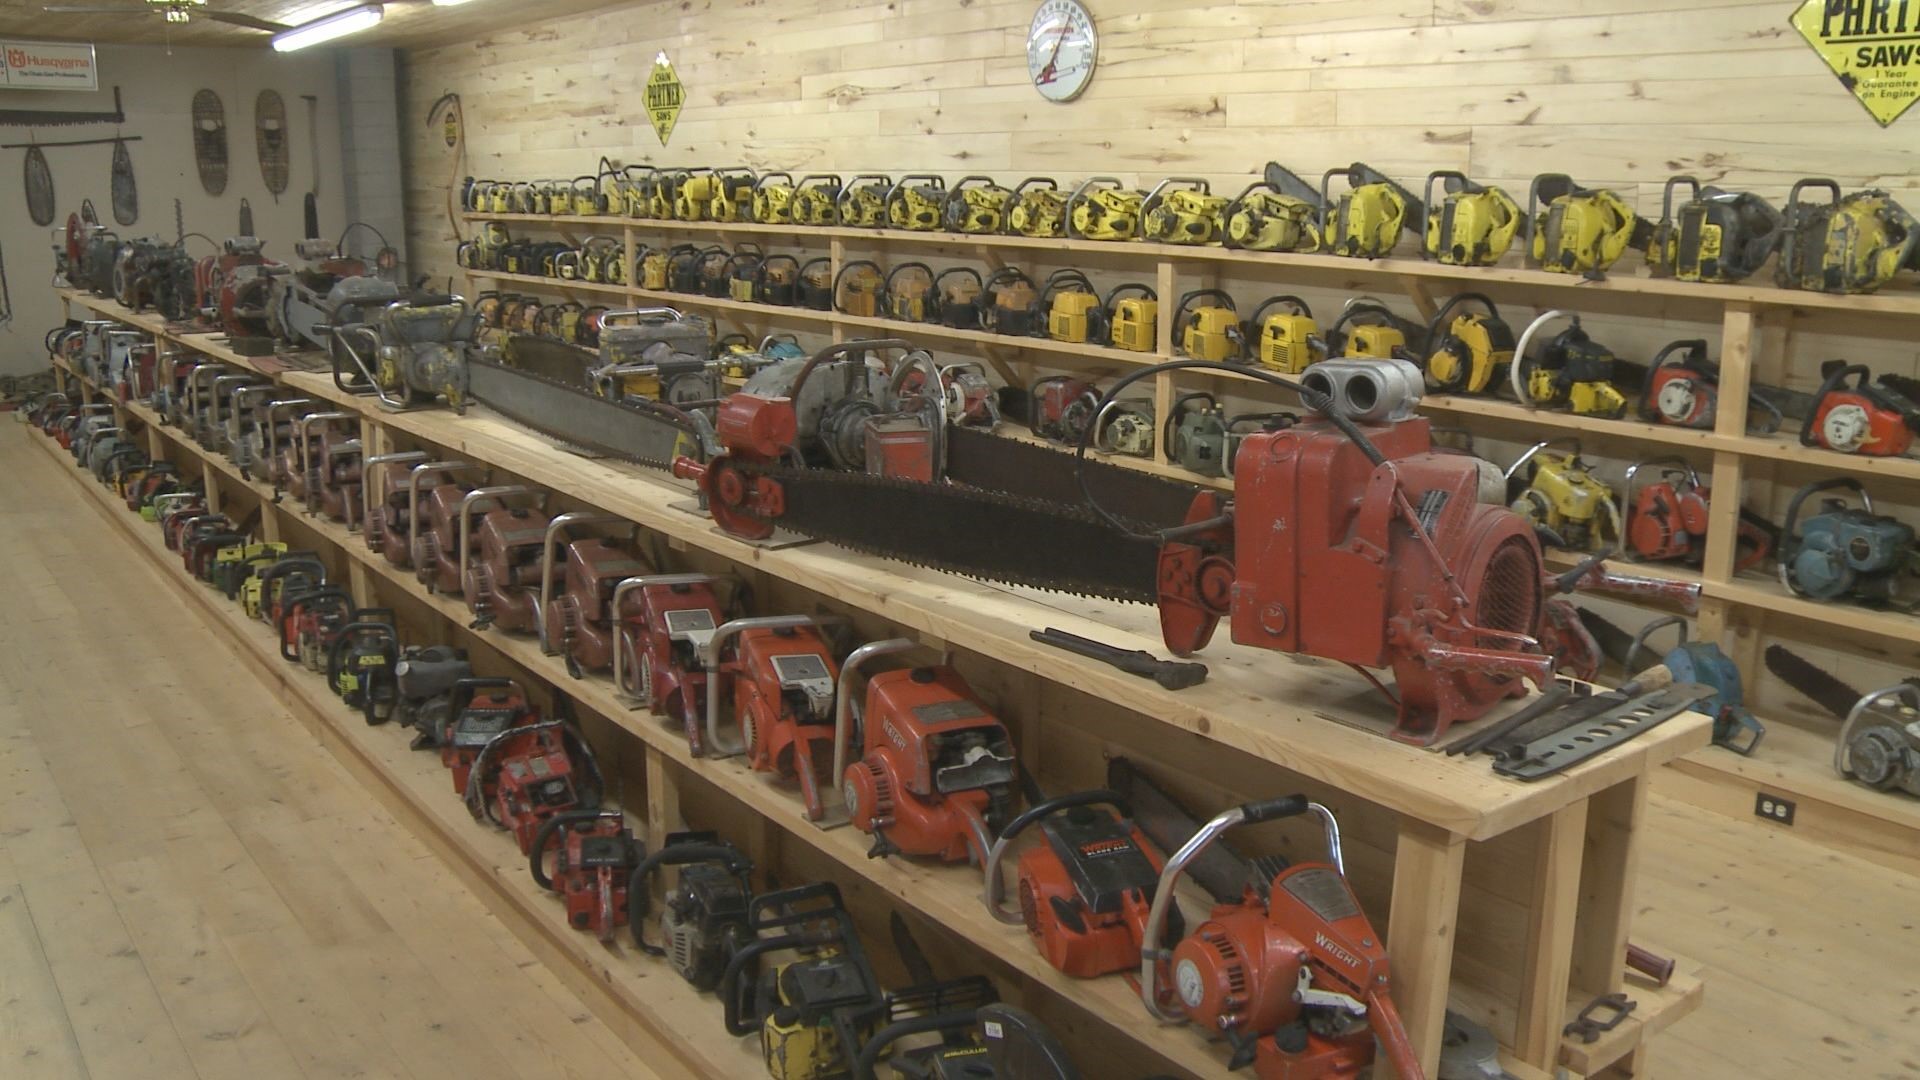 Visit Maine's Only Chainsaw Museum